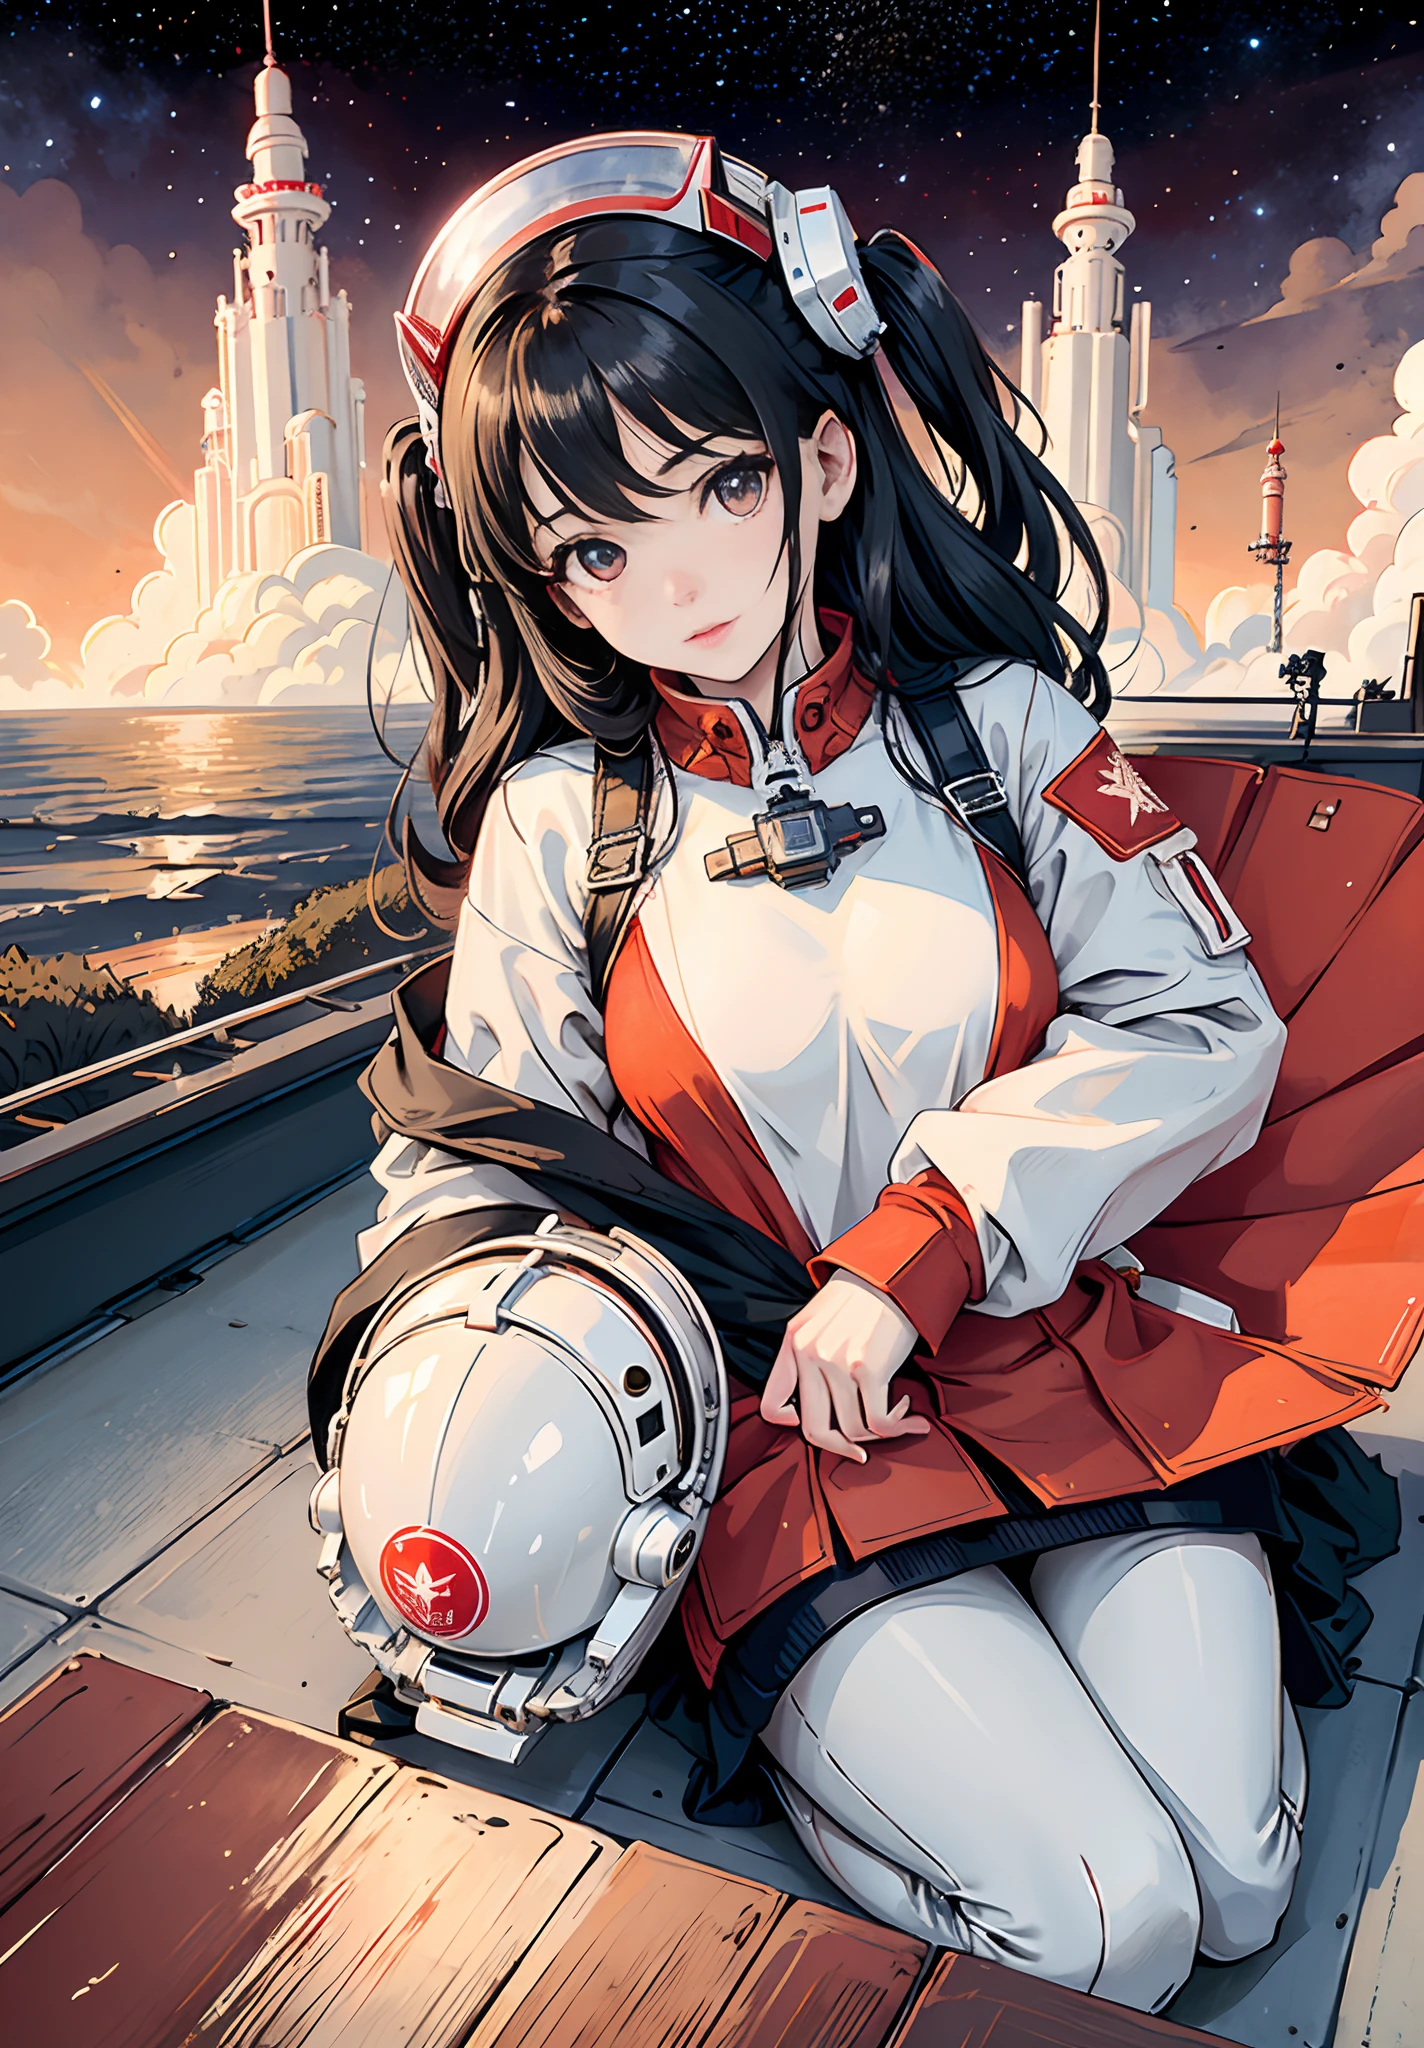 1Girl,Cute,Beautiful detailed eyes,shiny hair,You can see it through the hair.,Hair between eyes, CCCPposter, sovietposter,Red monochrome,USSR Poster, soviet,communism,
black_heads,red_eyes,Vampire,teenage,Middle breast,space suit:orange_Clothing_Body:jumpsuit),white_glove, white_space shoes, white_helmet, CCCP red letter on the top of the helmet, zero gravity, sidelit, reflection, A person in a spacesuit is located in the lower left corner of the frame, The right hand is outstretched, The right hand gently touches the Salyut space station), Space station in the upper right corner of the screen, Light reflected from the sun, Silver metal,red flag, brilliance,Soviet style, diffuse reflection, Metallic texture, The vista is the blue earth,in mecha style,Sea of Stars,Treble, majestueux